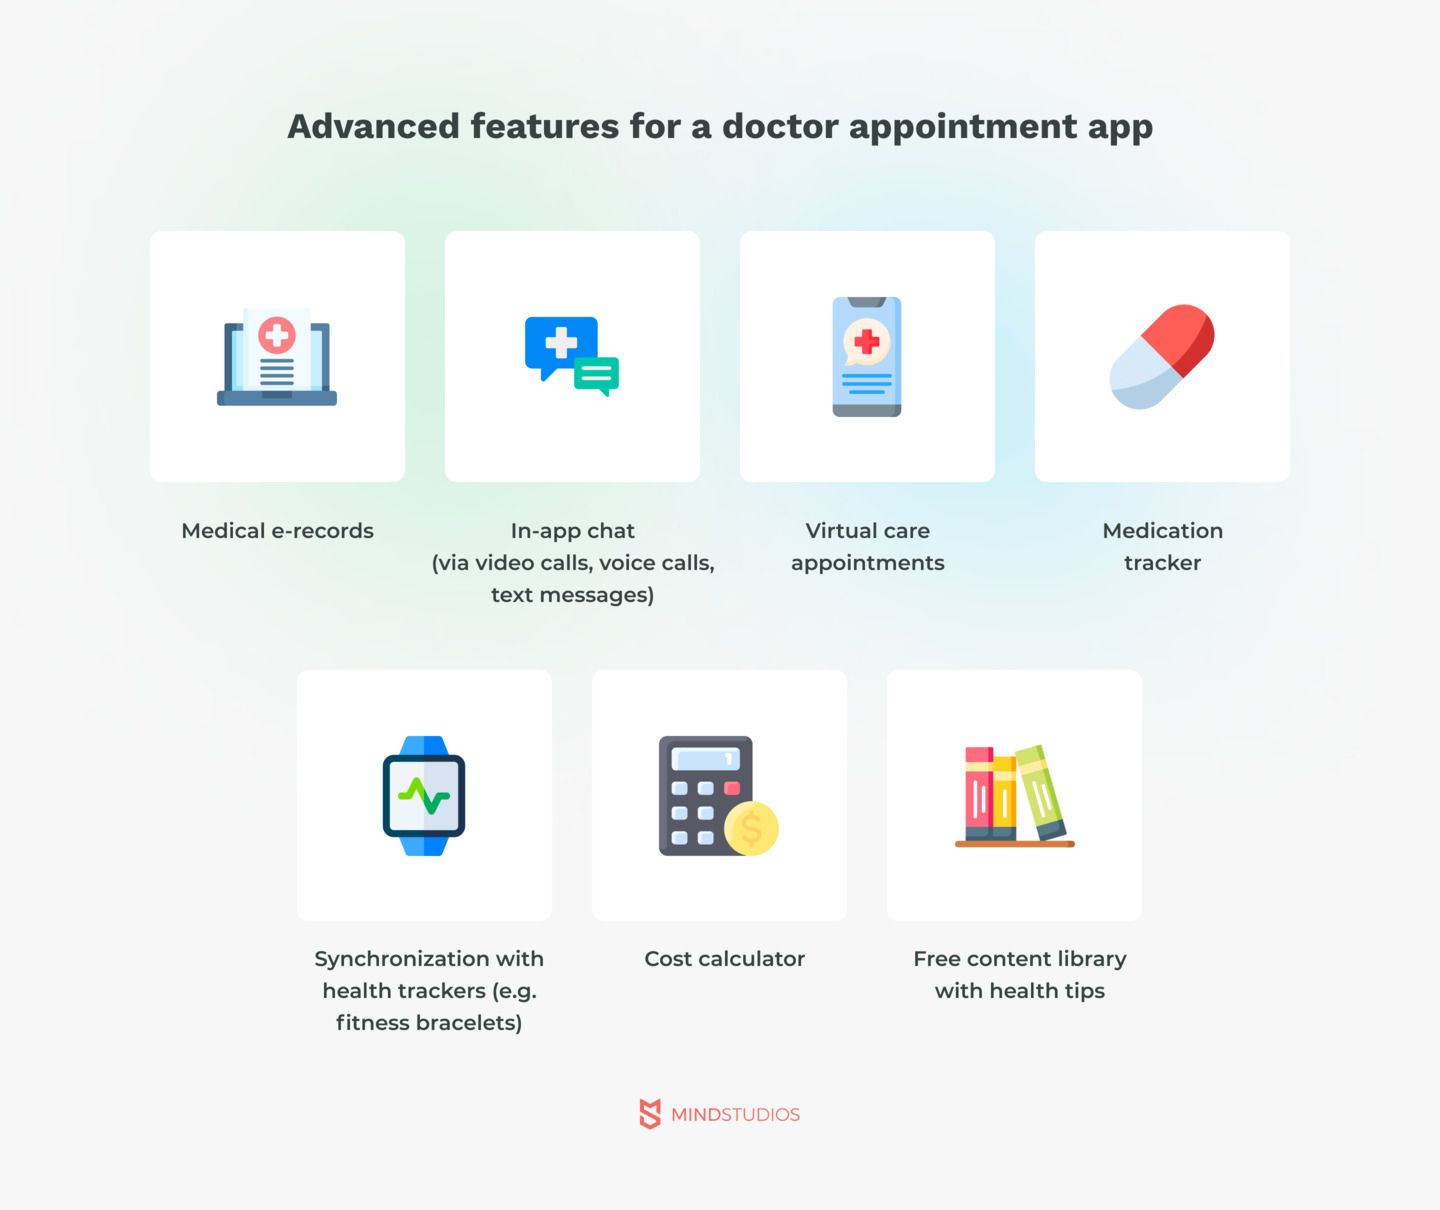 Advanced features for a doctor appointment app